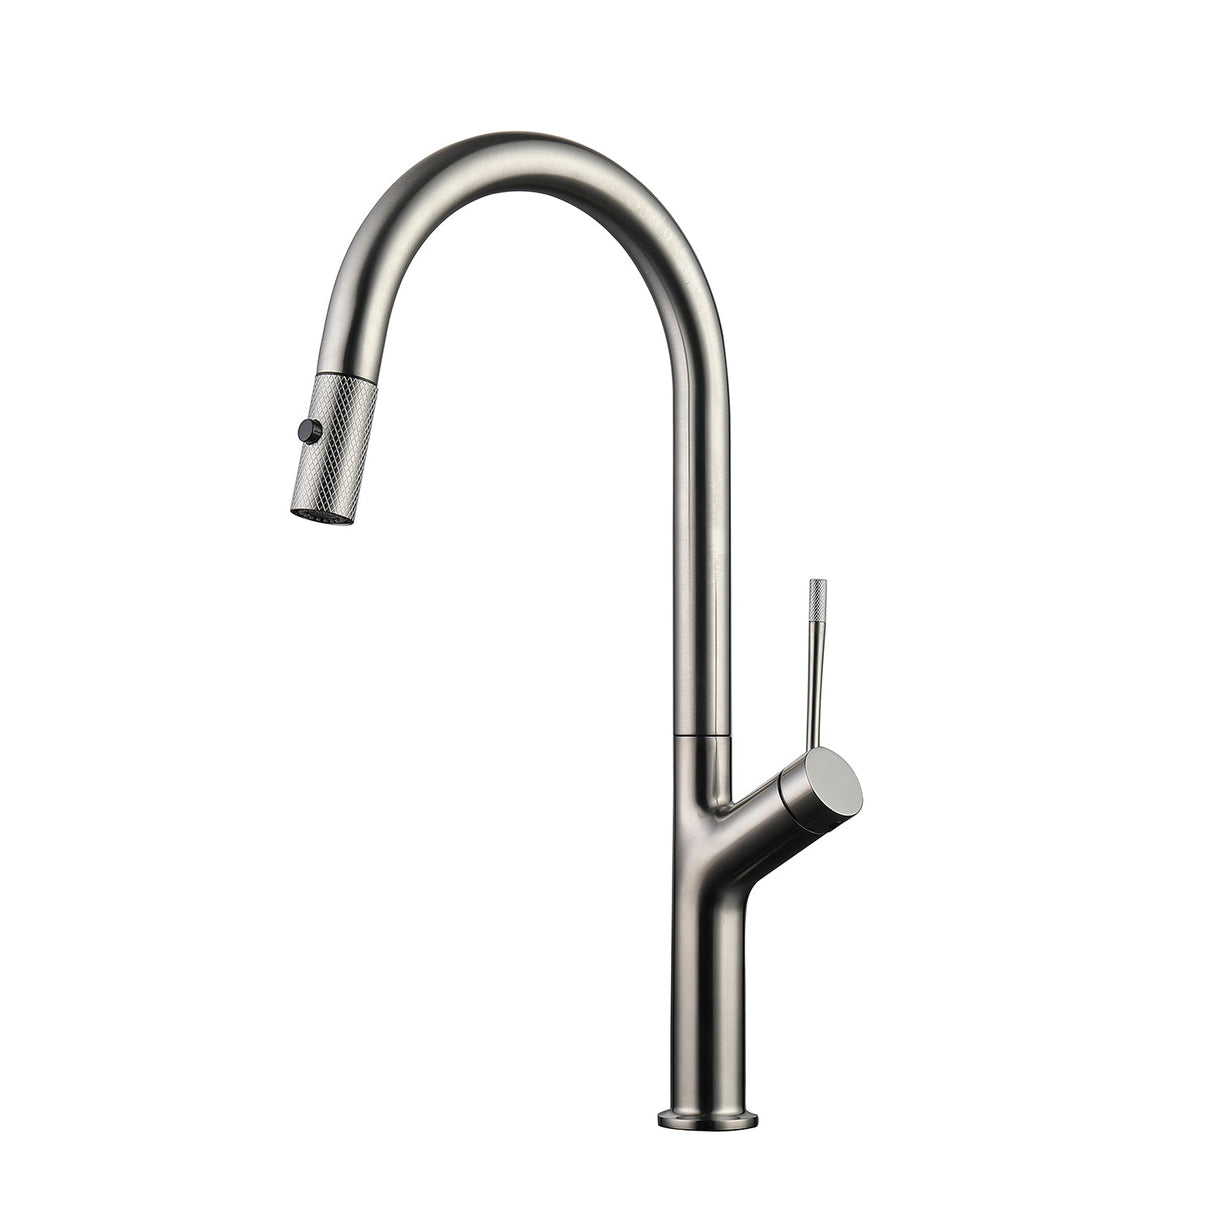 DAX Brass Single Handle Pull Out Kitchen Faucet, Nickel DAX-8020011-BN